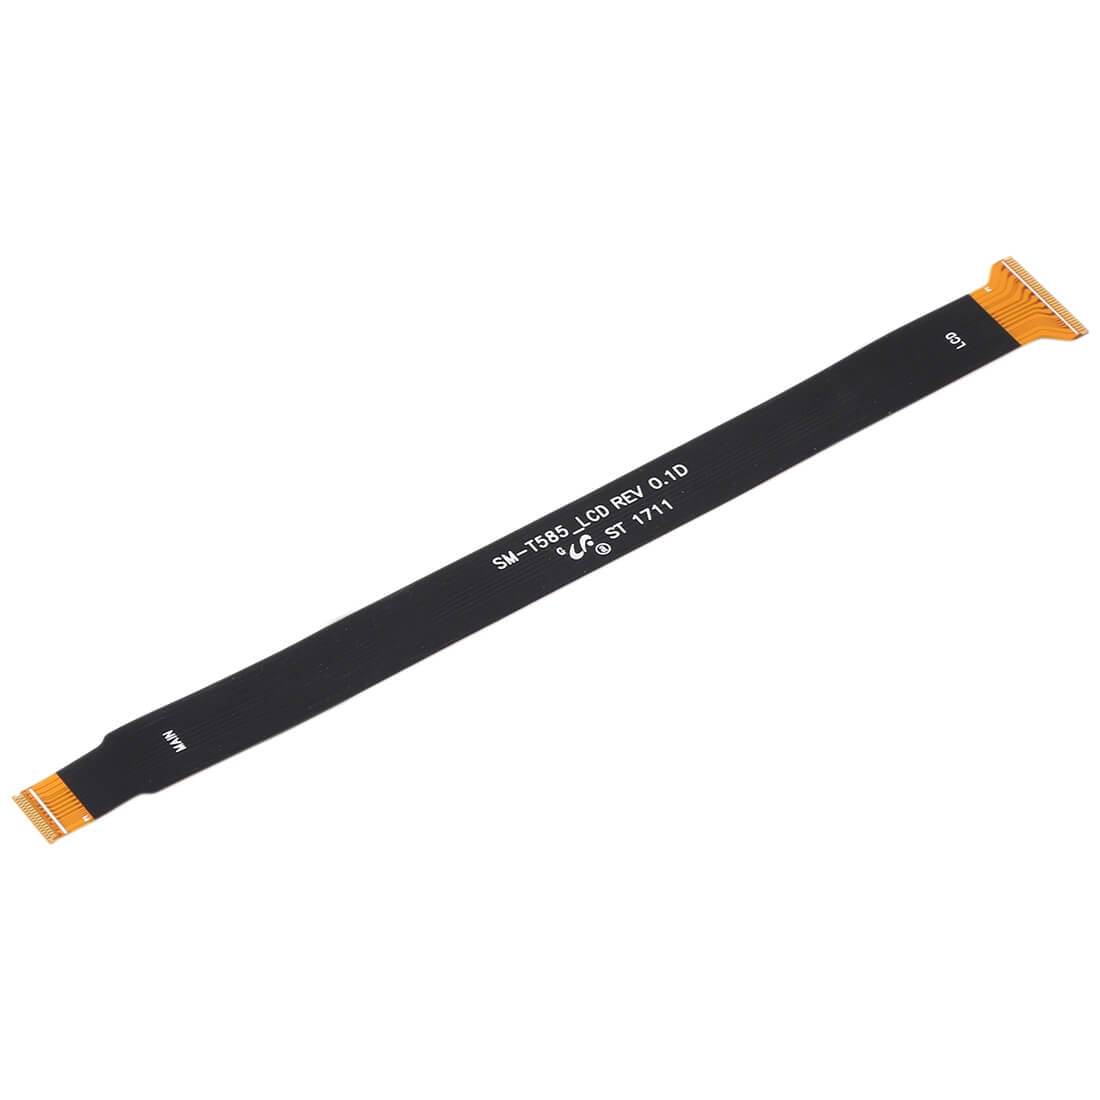 Main LCD Internal Flex Cable For Samsung Galaxy Tab A 10.1 2016 Replacement Connection